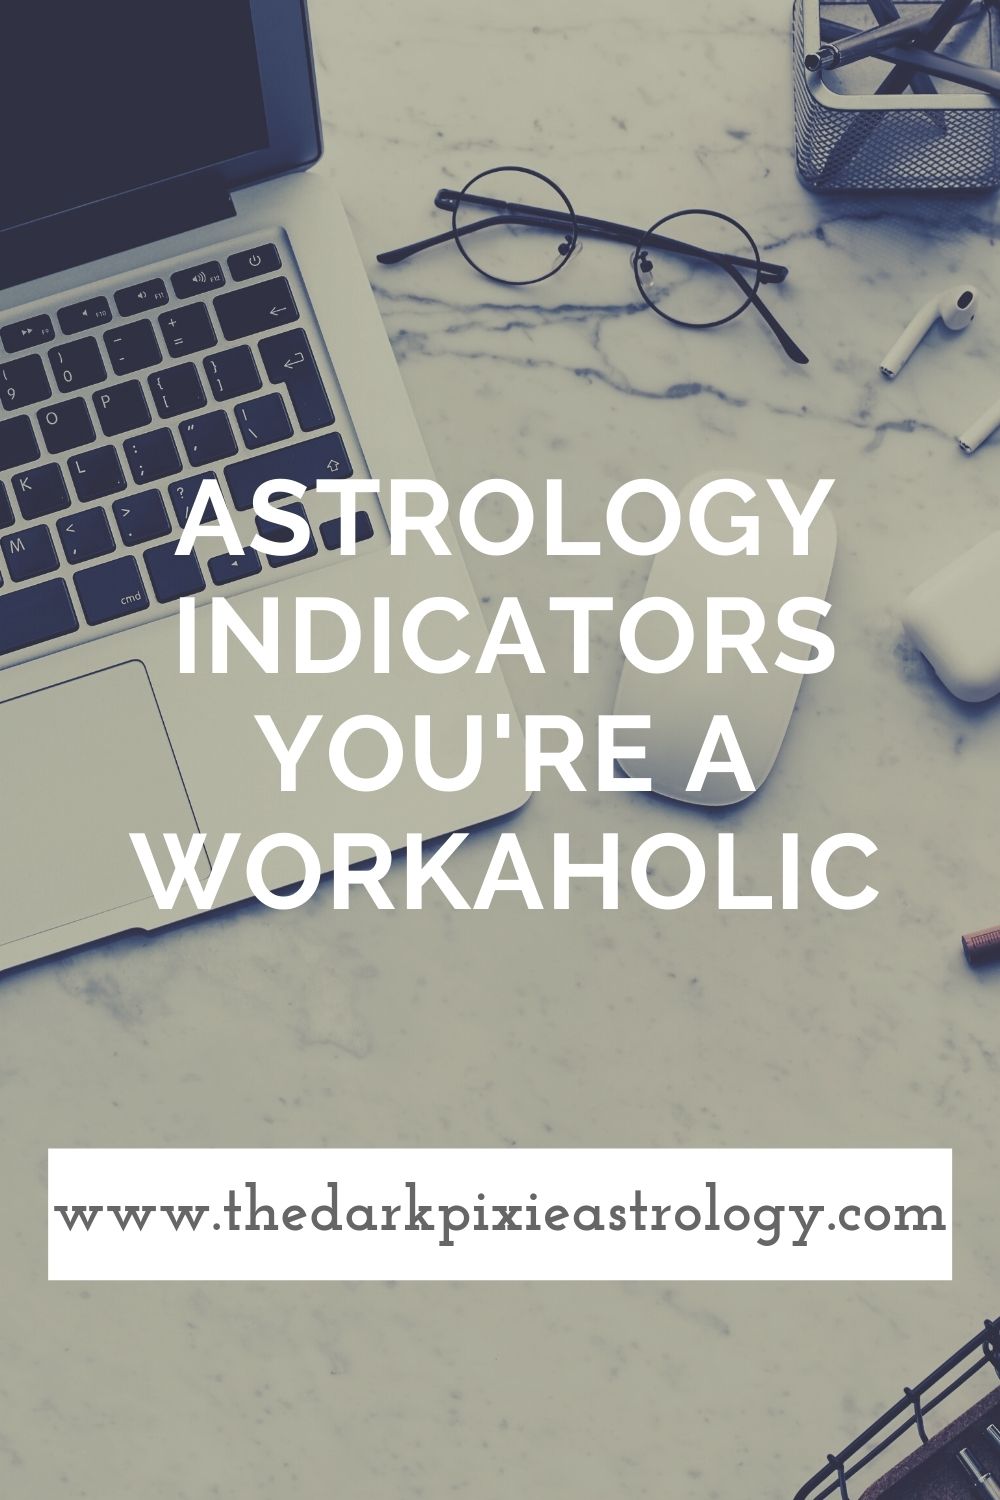 Astrology Indicators You're a Workaholic - The Dark Pixie Astrology